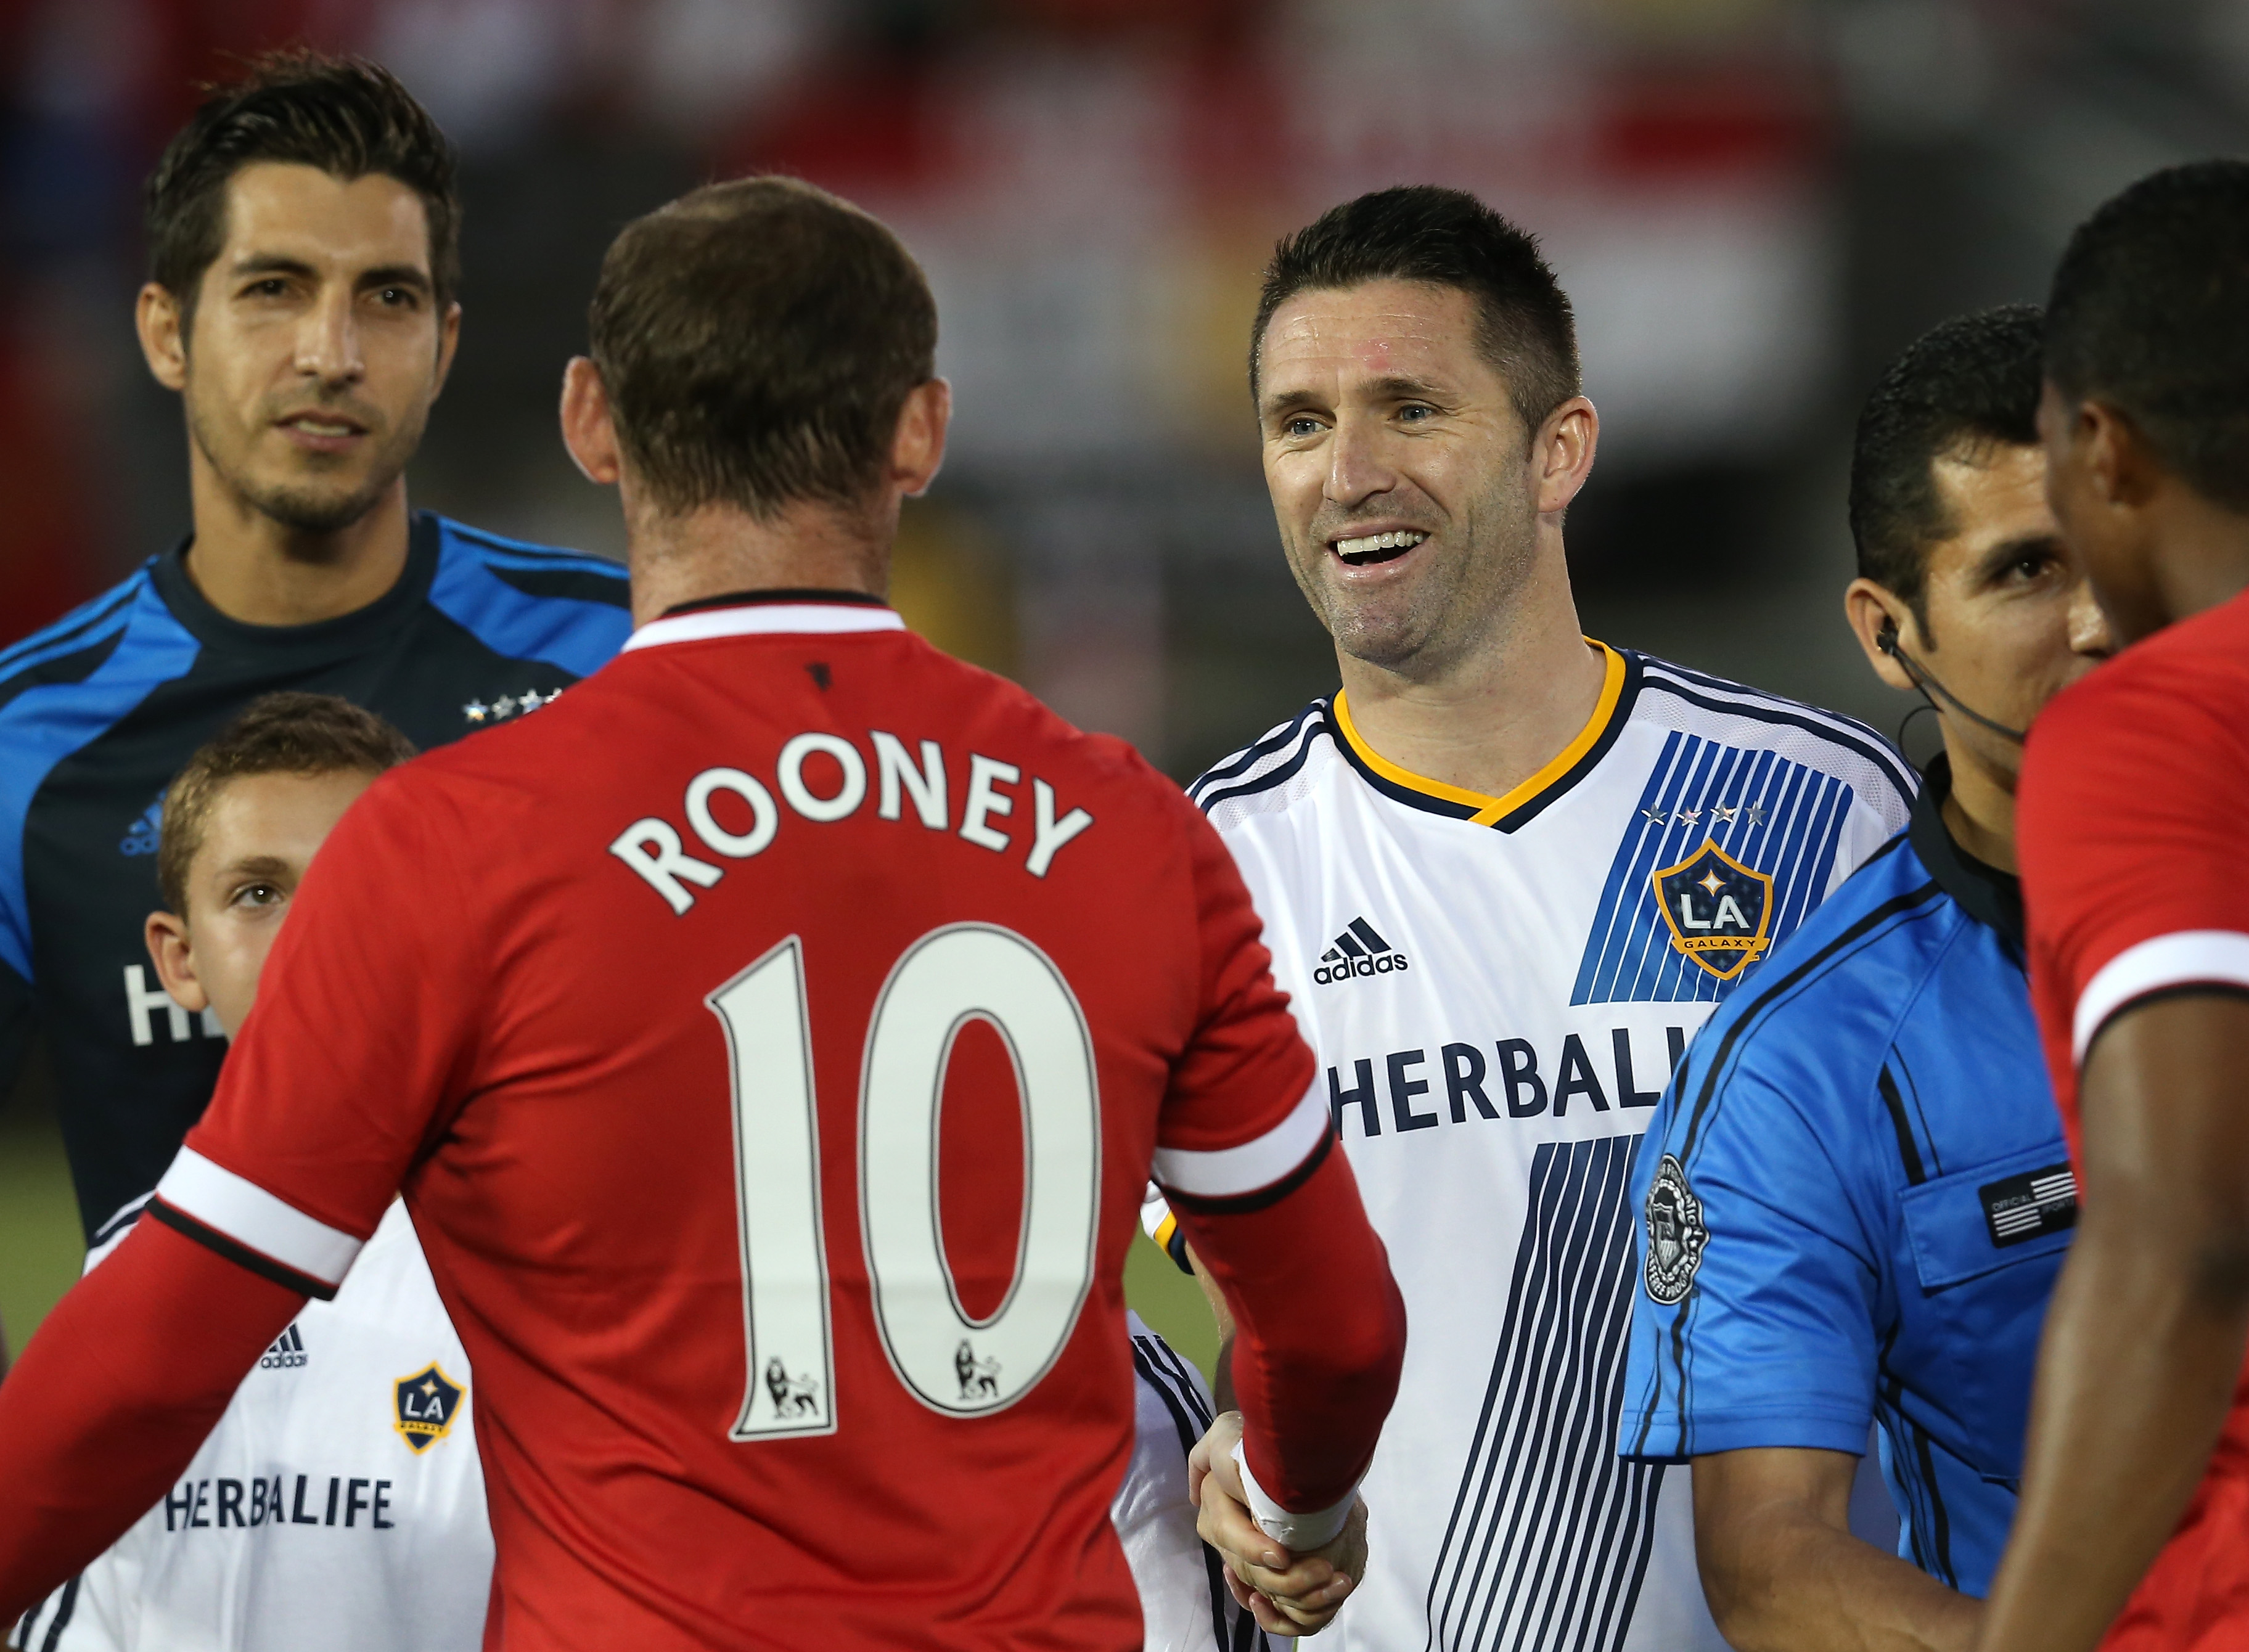 Robbie Keane #7 of the Los Angeles Galaxy greets Wayne Rooney #10 of Manchester United drurning prematch ceremonies at the Rose Bowl on July 23, 2014 in Pasadena, California. (Stephen Dunn—Getty Images)